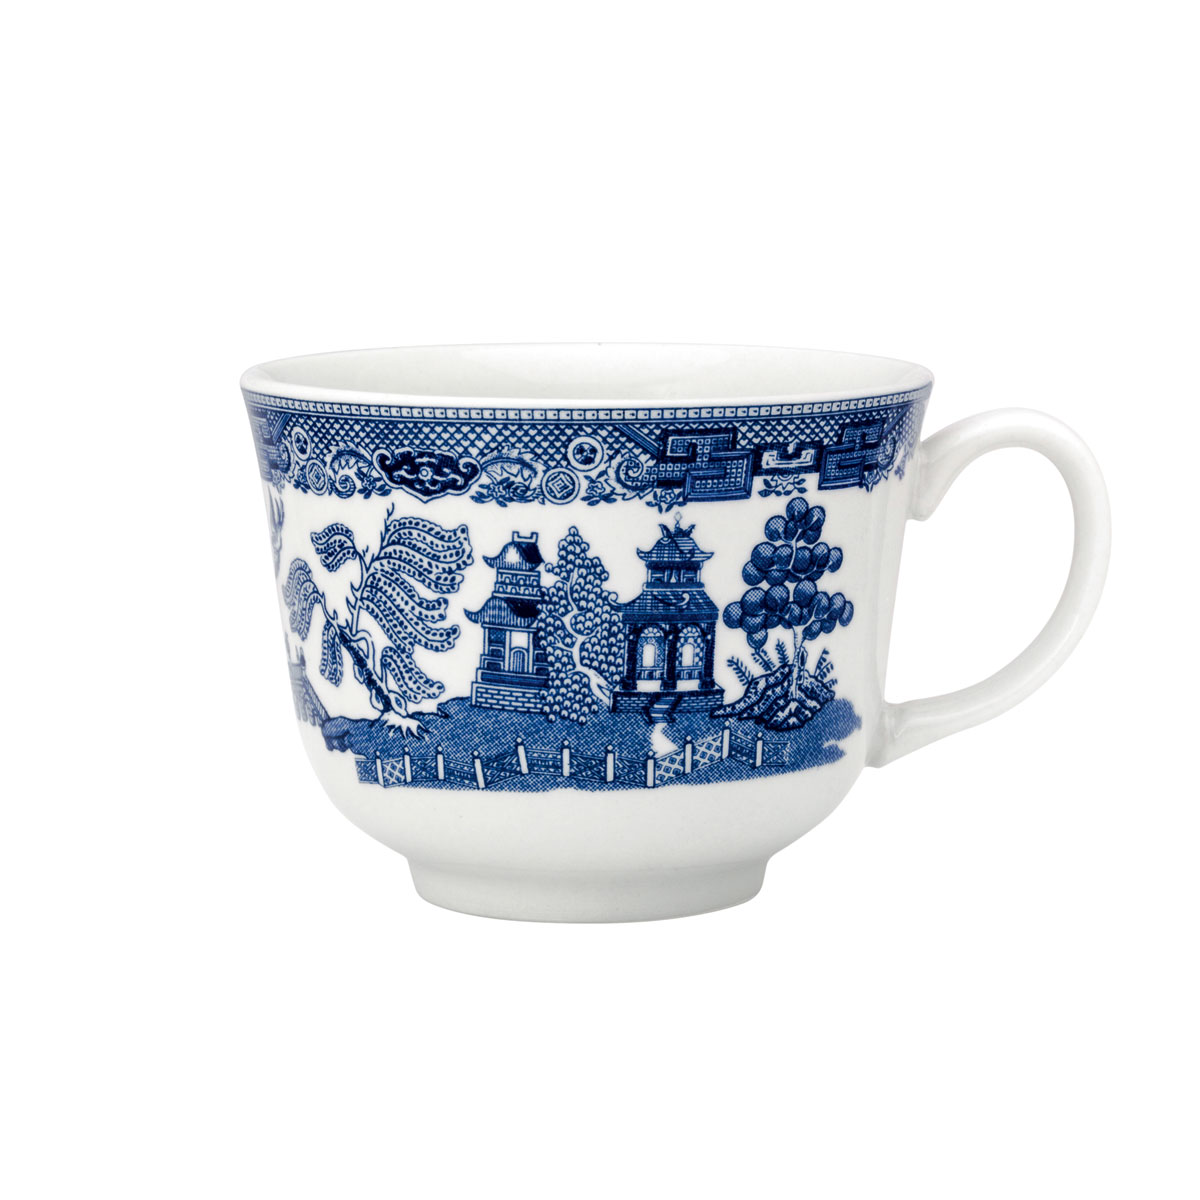 Johnson Brothers Willow Blue Teacup 7oz., Single